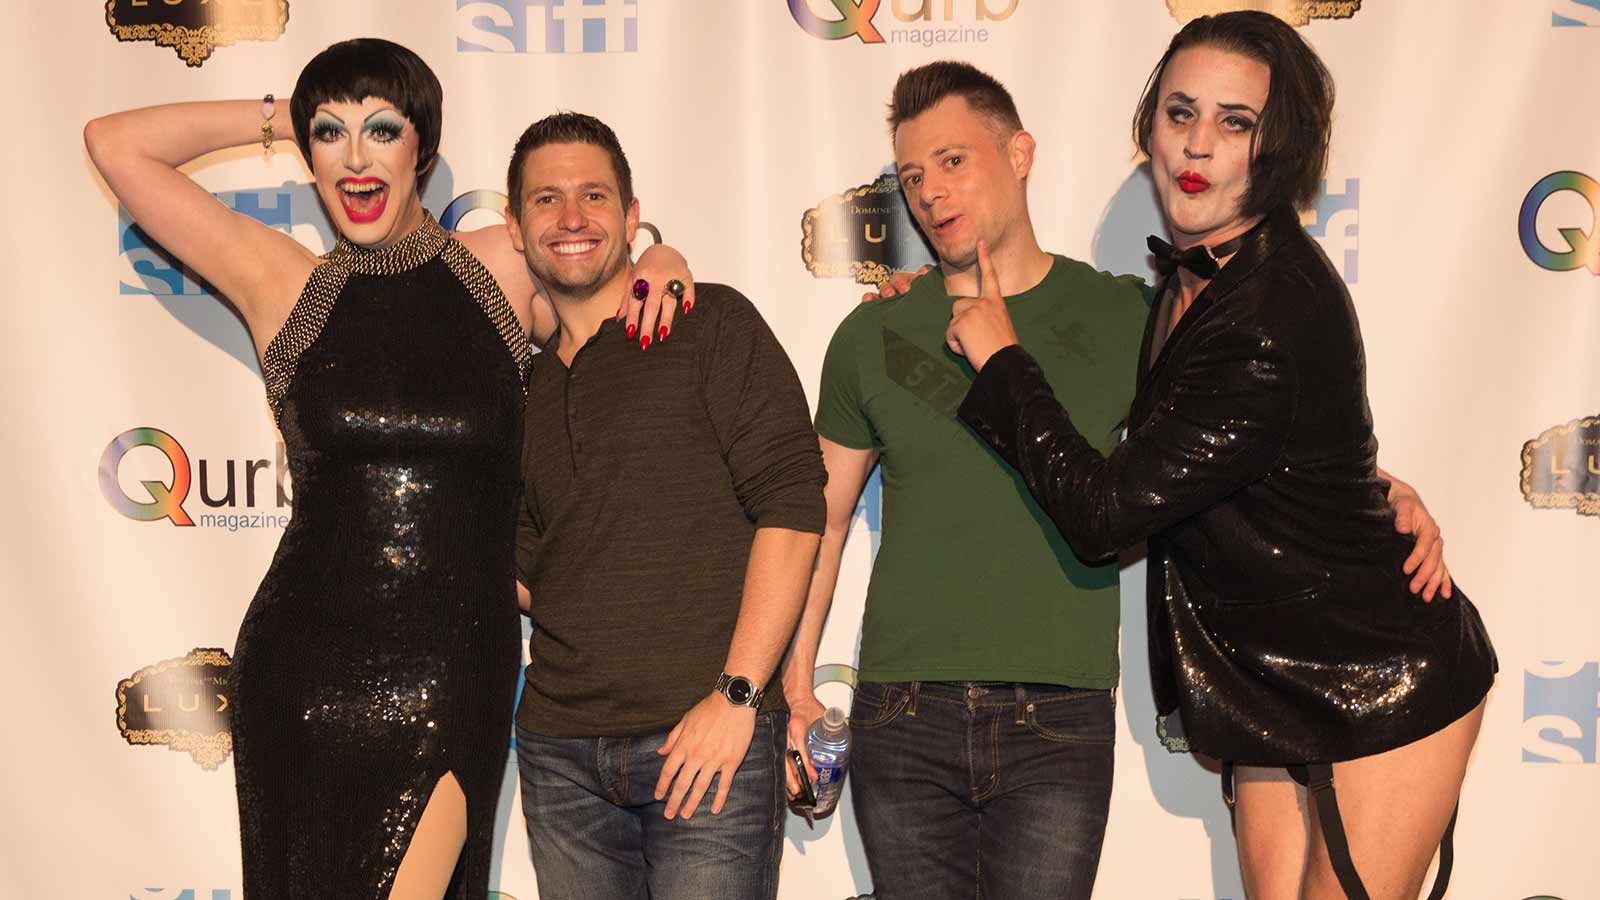 Two Drag Queens with Guests